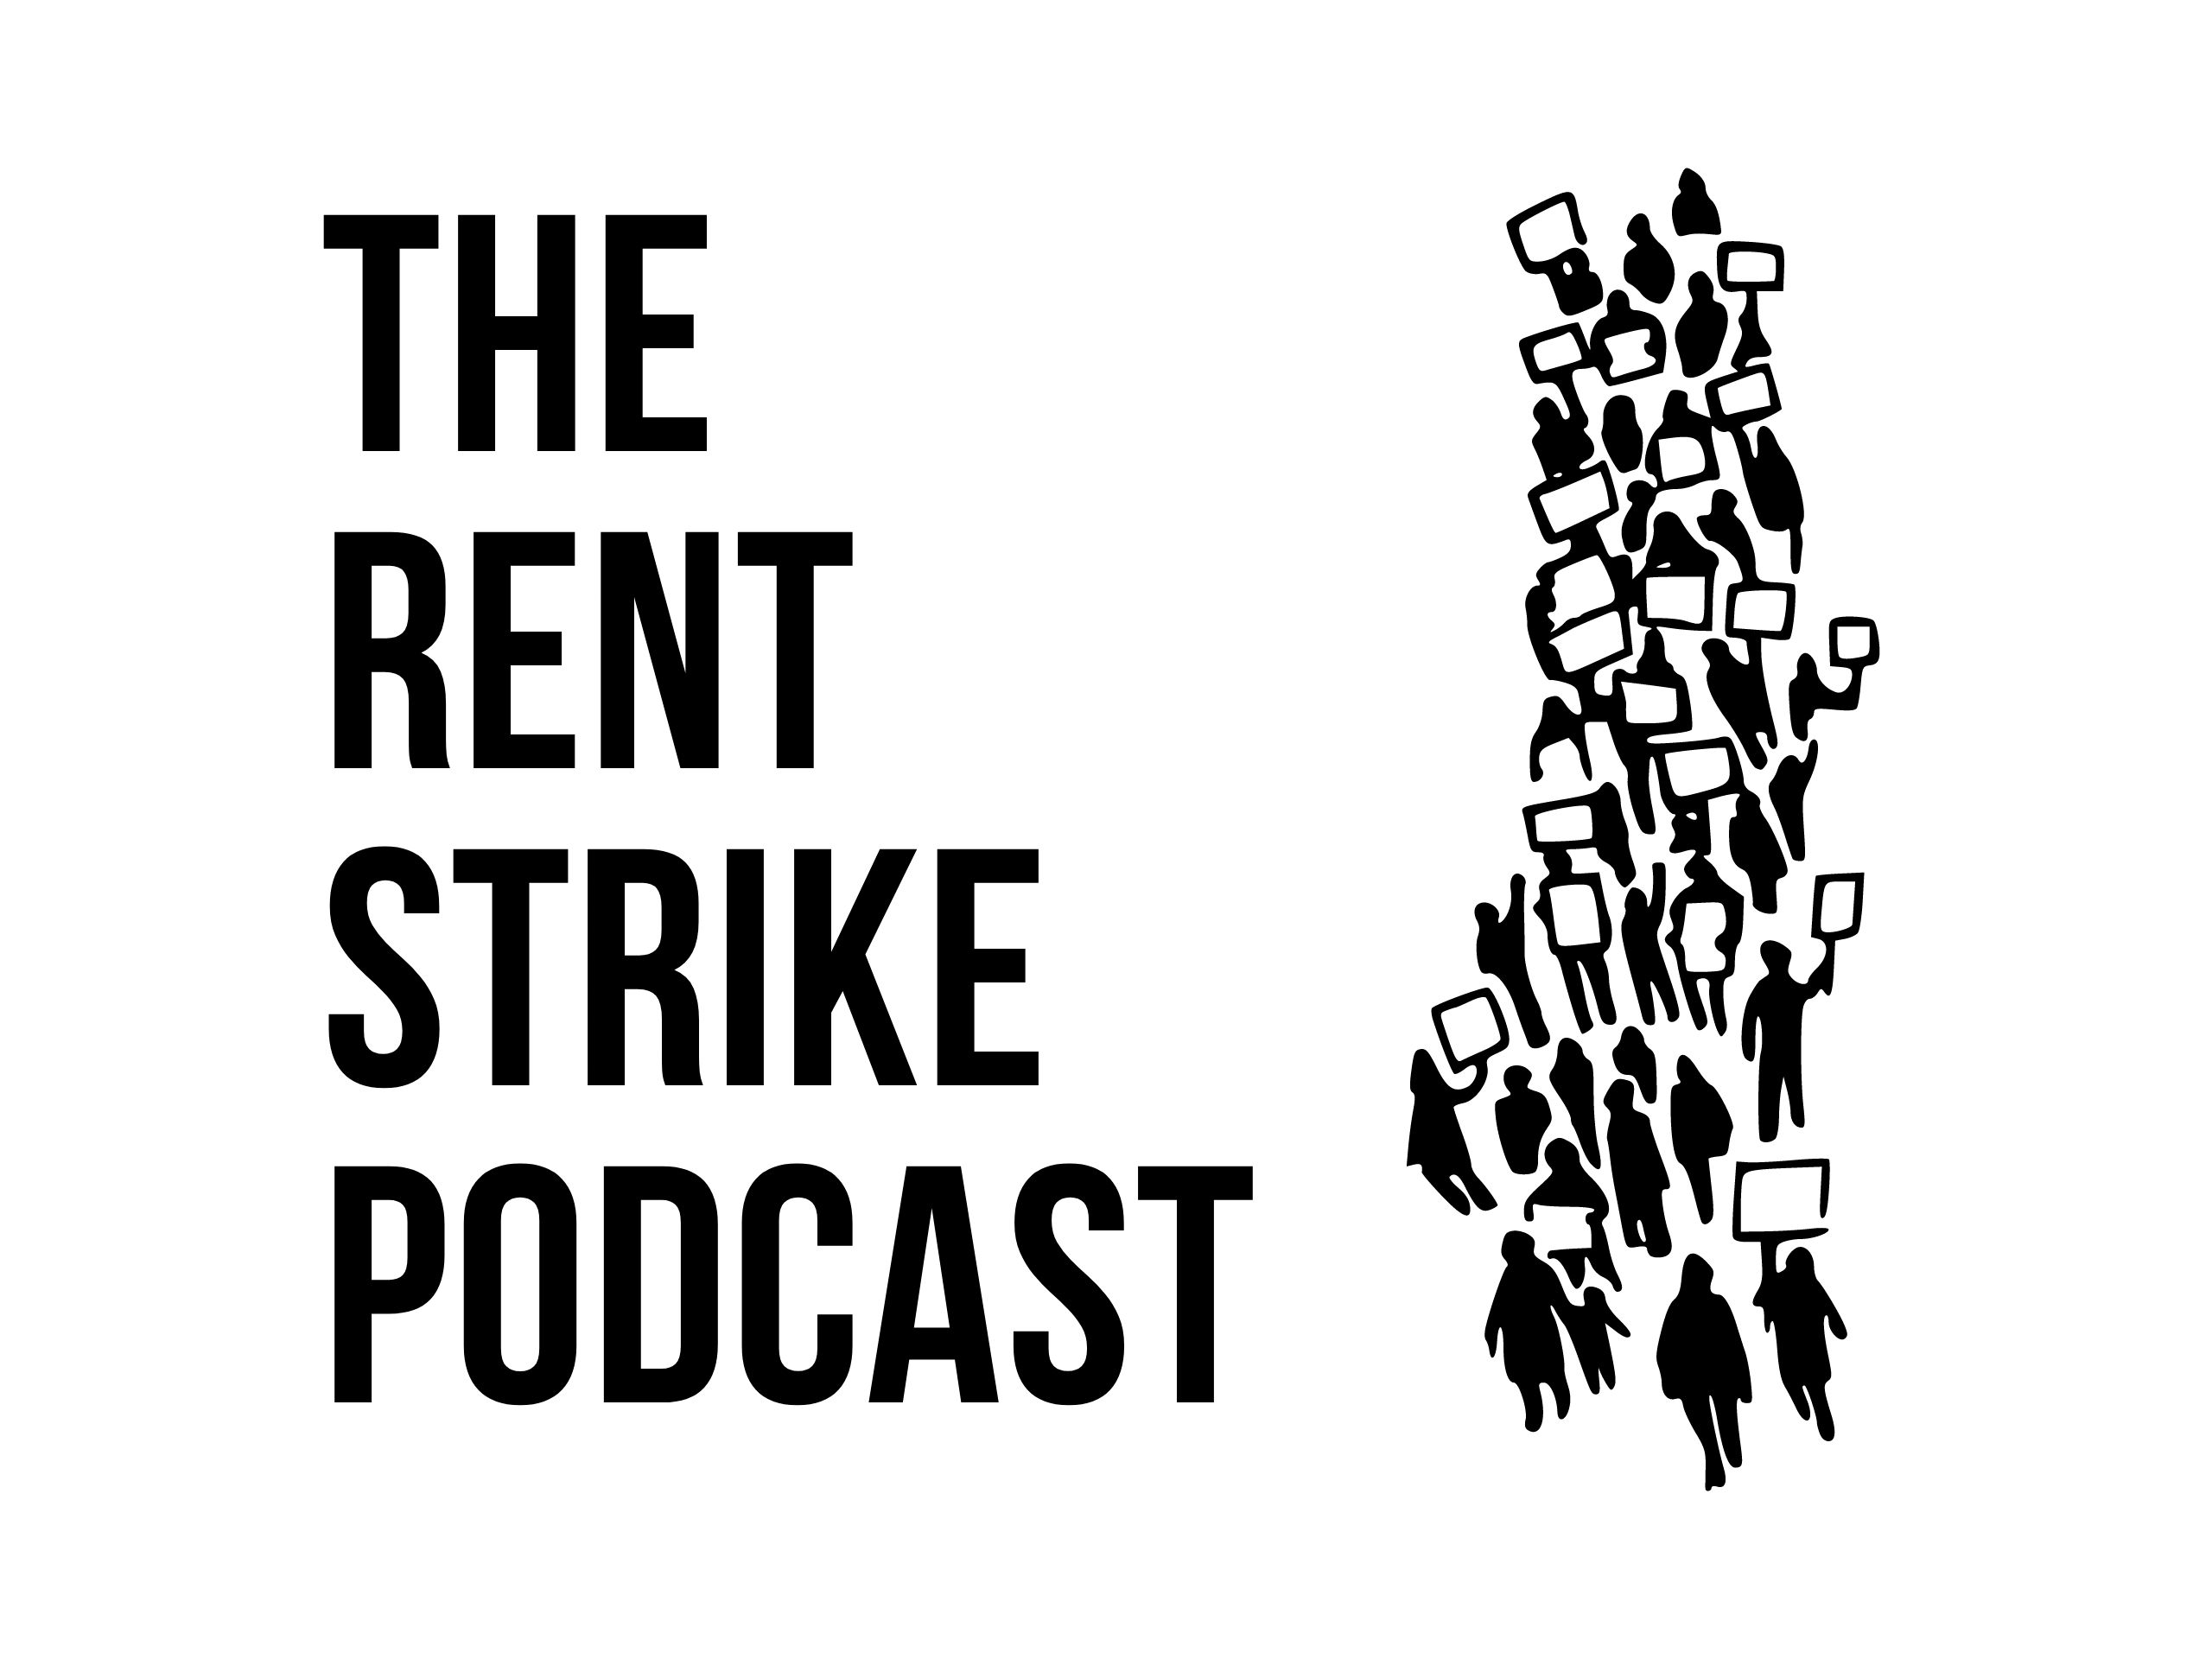 STUDENTS FOR FAIR RENT